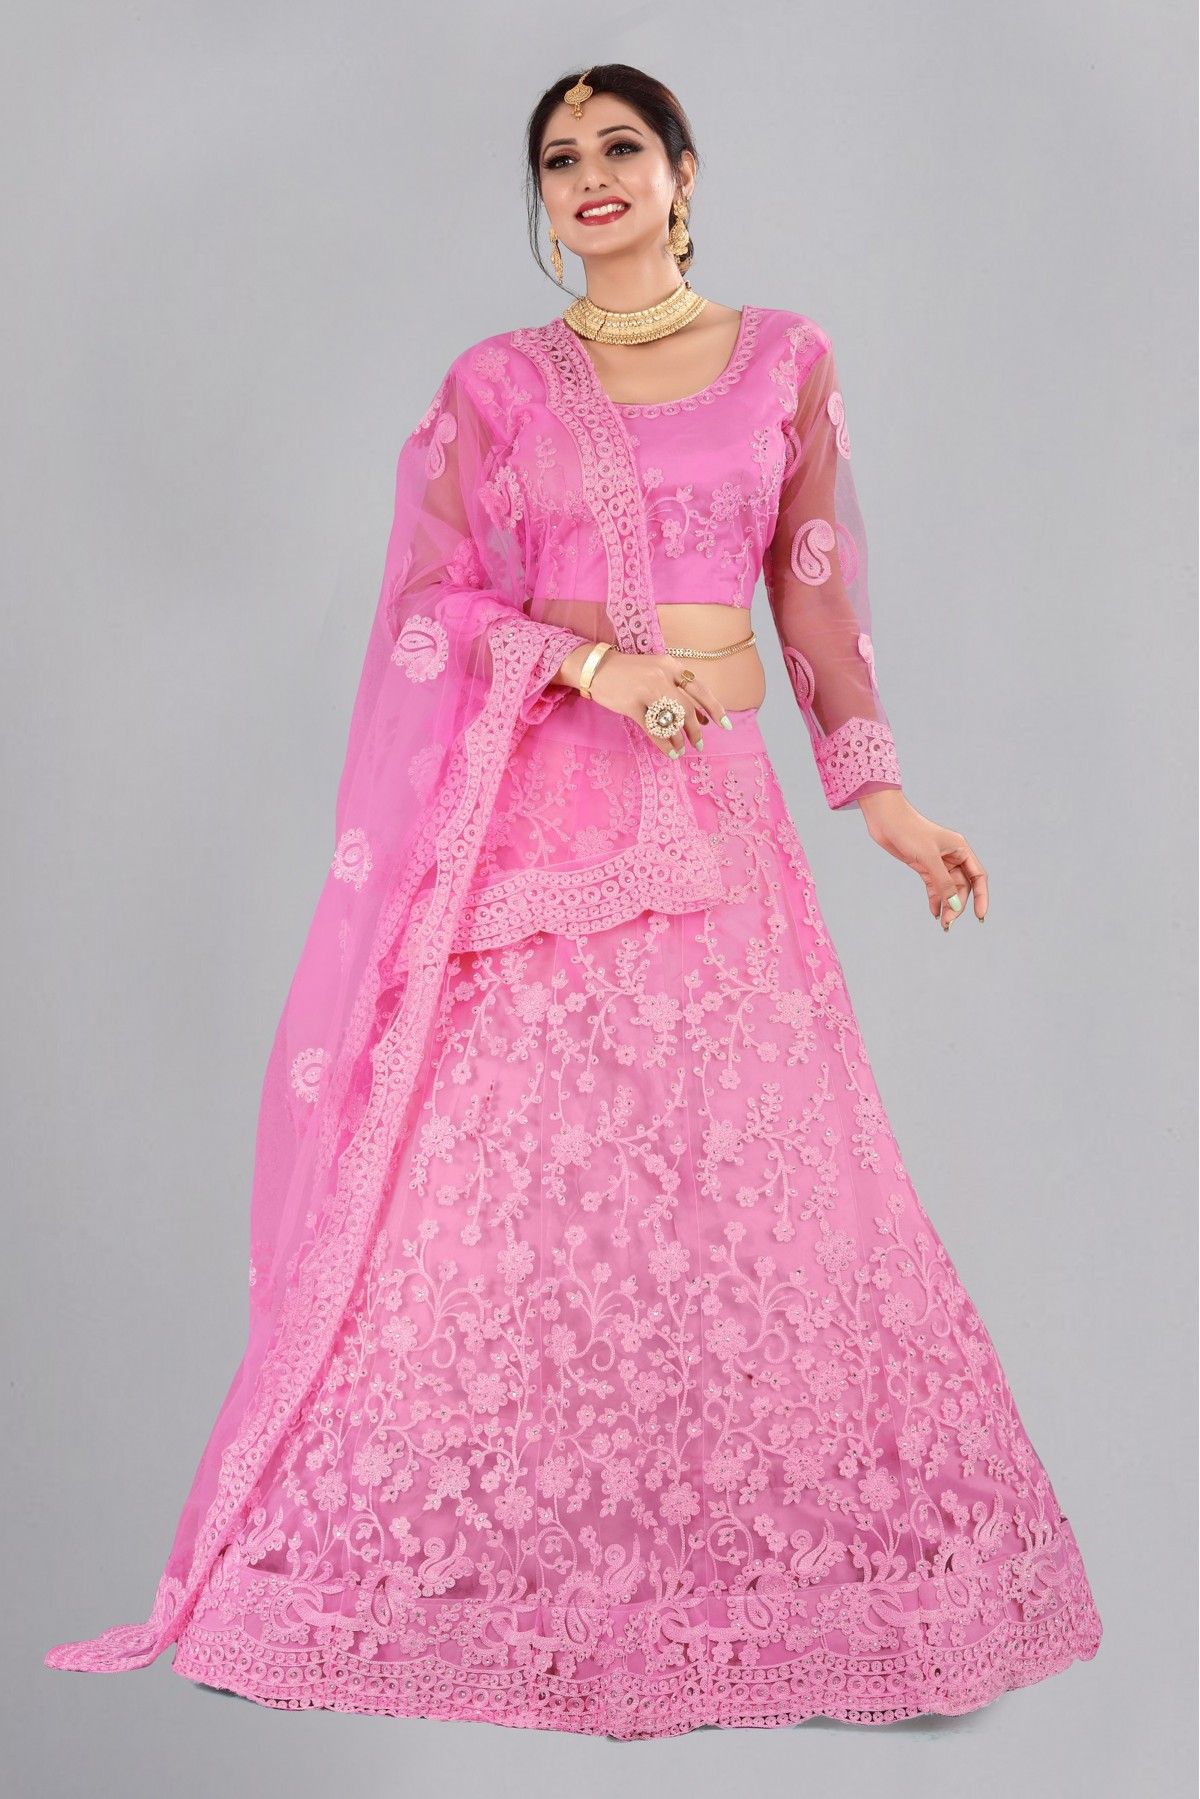 Net Embroidery Lehenga Choli In Baby Pink Colour - LD5680082